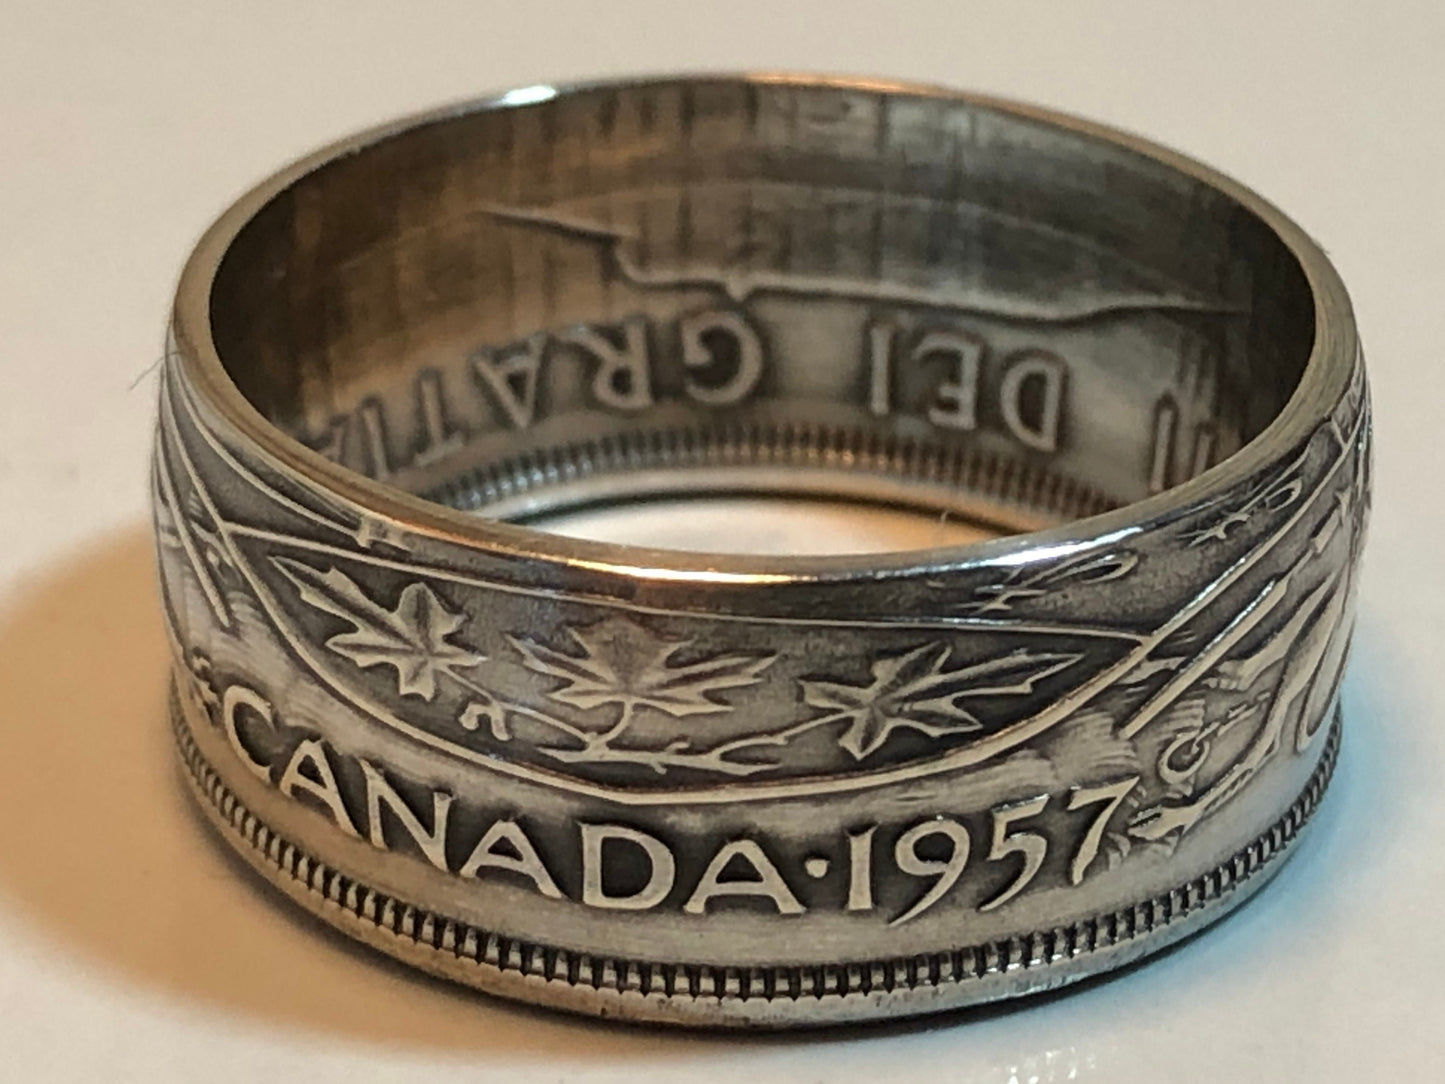 Canada Ring Silver 50 Cent Piece Canadian Coin Ring Handmade Personal Jewelry Ring Gift For Friend Gift For Him Her World Coin Collector